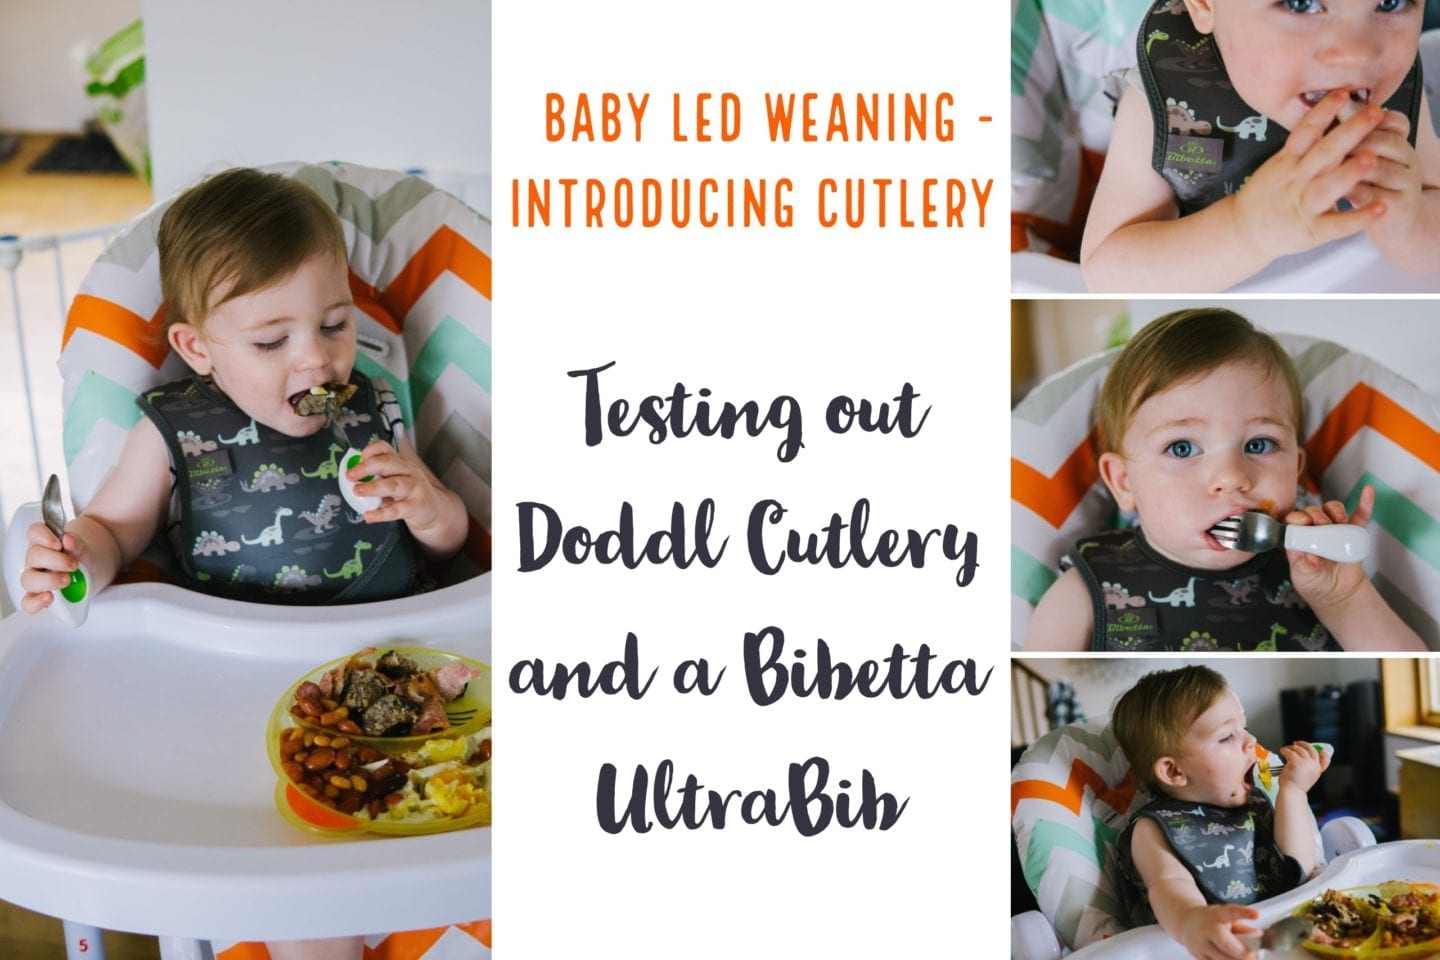 Stage 2 of Baby Led Weaning – Introducing Cutlery with Doddl Cutlery